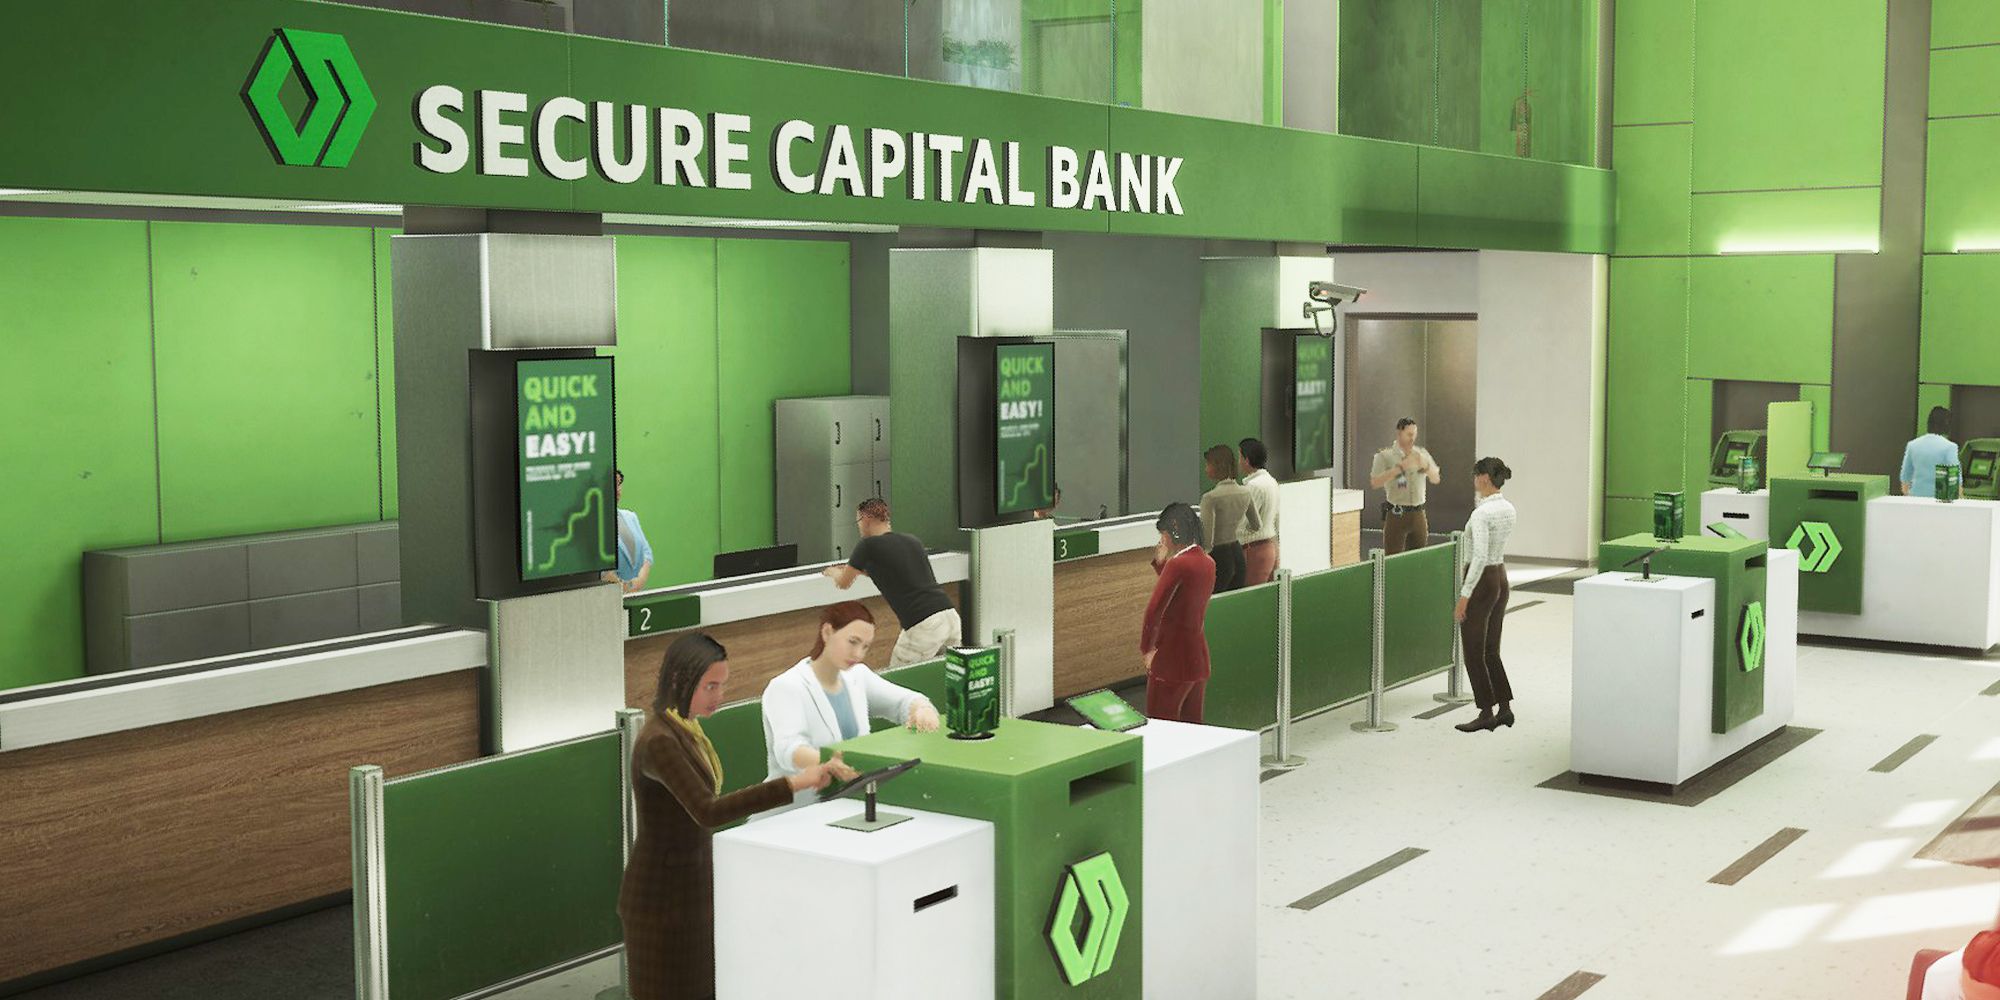 Payday 3 civilians queing up to be served at Secure Capital Bank